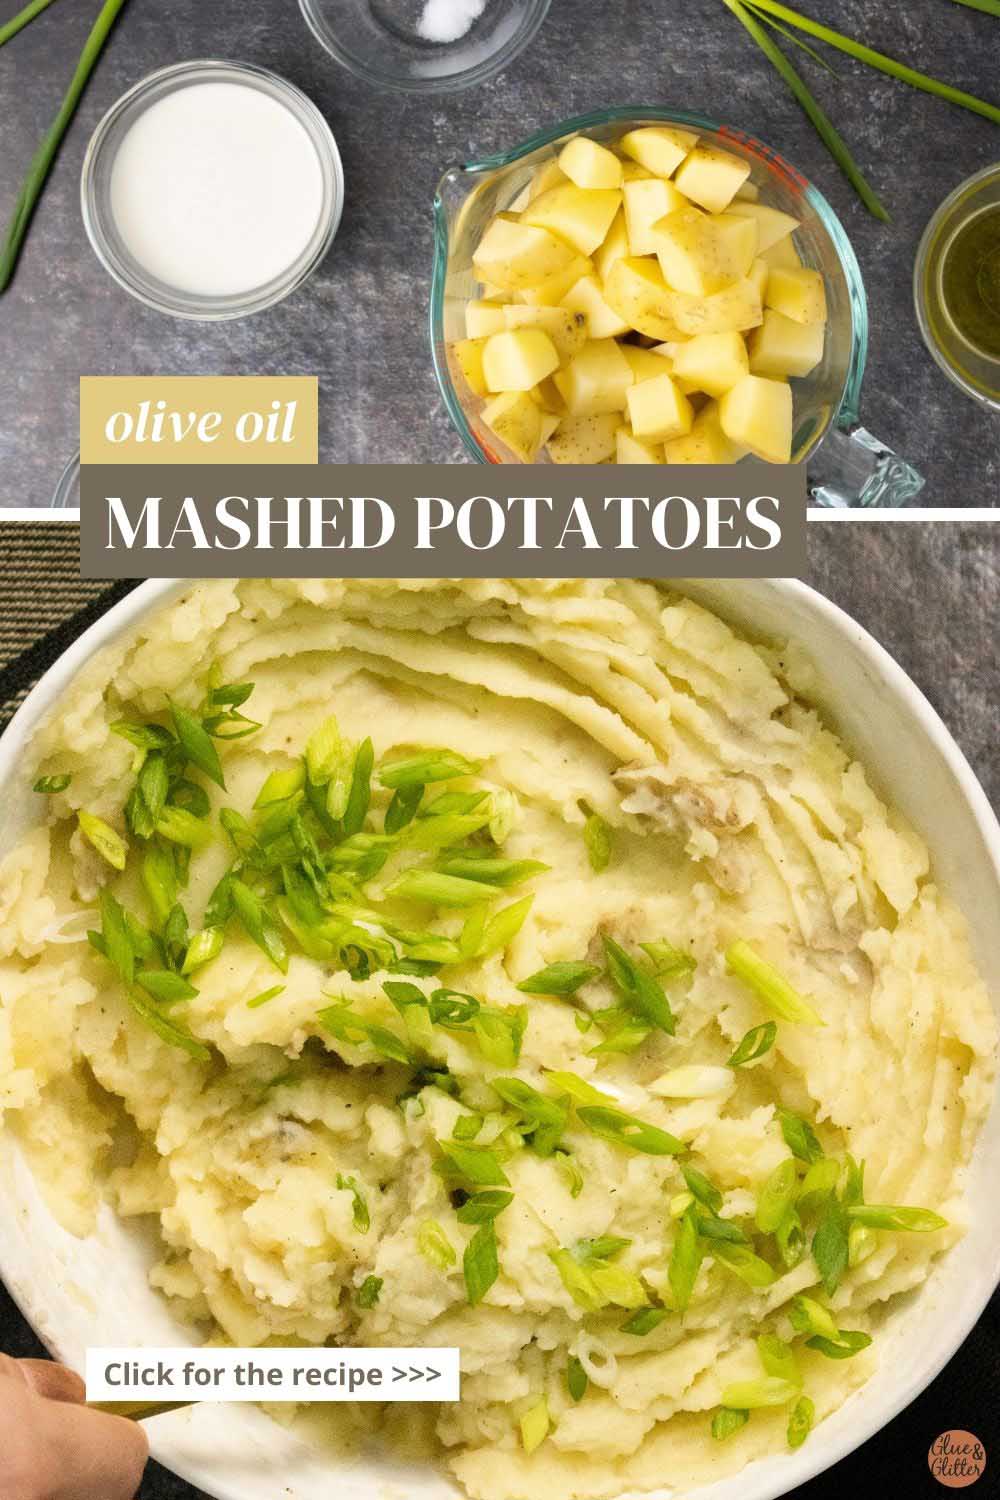 olive oil mashed potatoes in a serving bowl topped with green onion pieces, text overlay